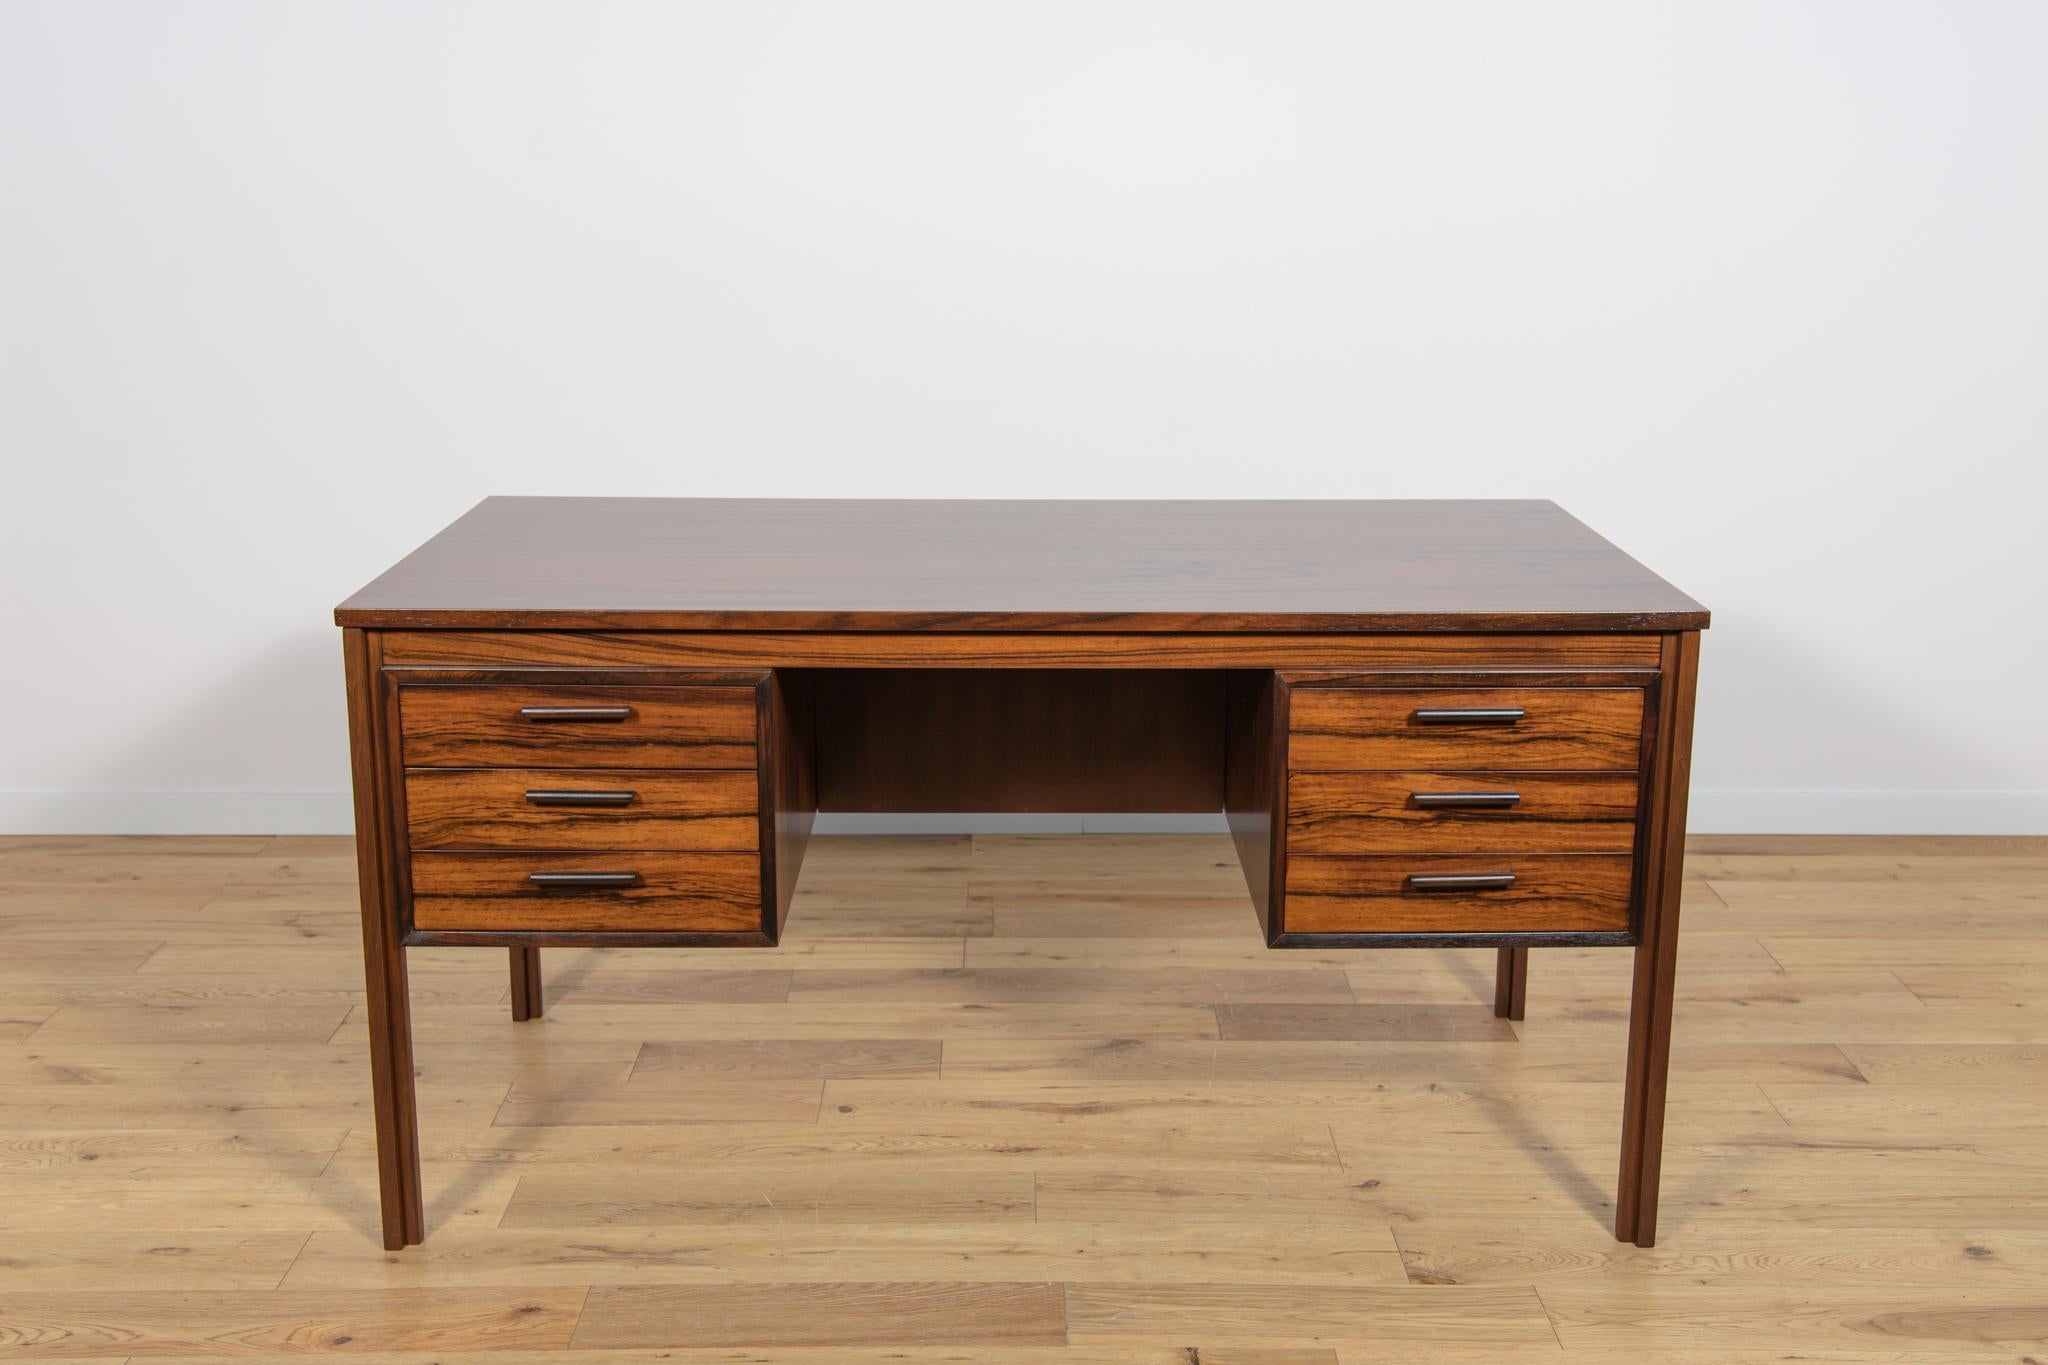 This desk made in Denmark in the 1960s. The desk is made of rosewood wood and is free-standing thanks to the finished back with an open storage bookspace . There are two modules at the front - three drawers each. The drawers has contoured rosewood